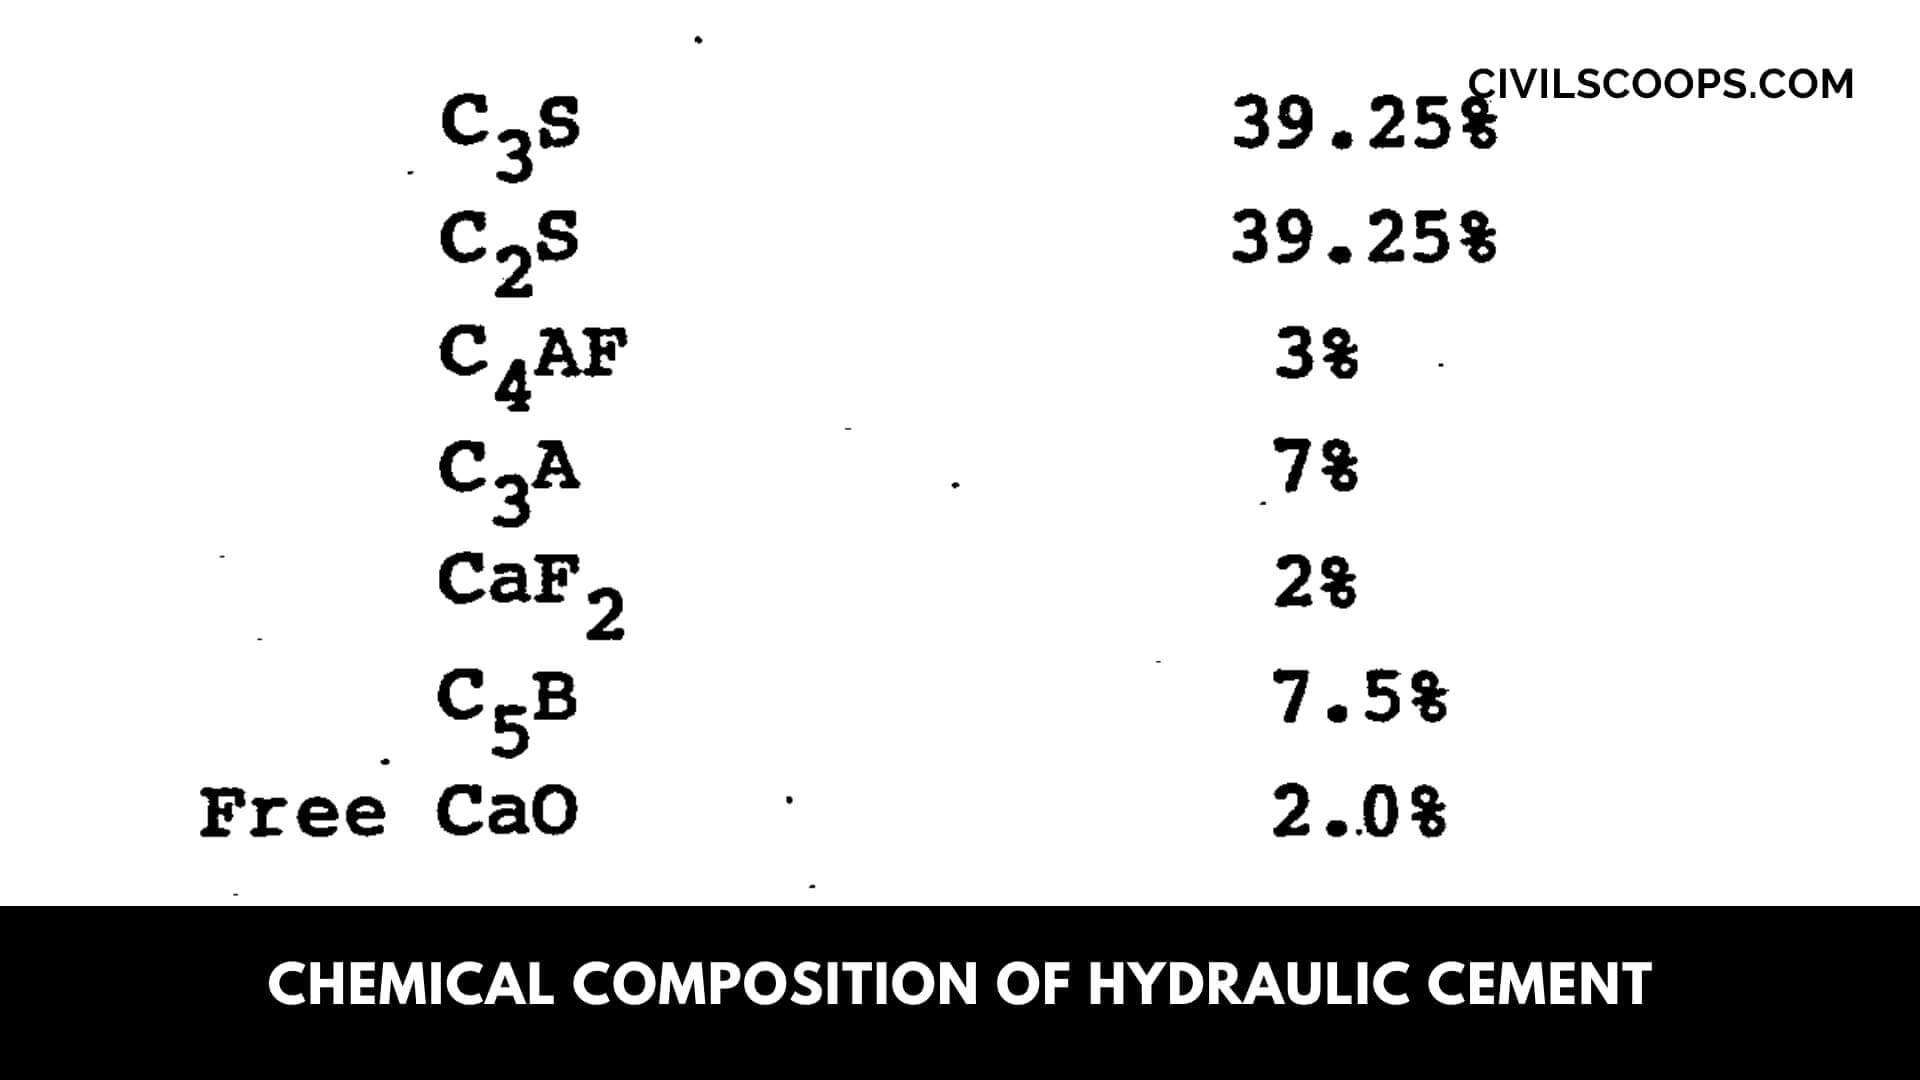 Chemical Composition of Hydraulic Cement